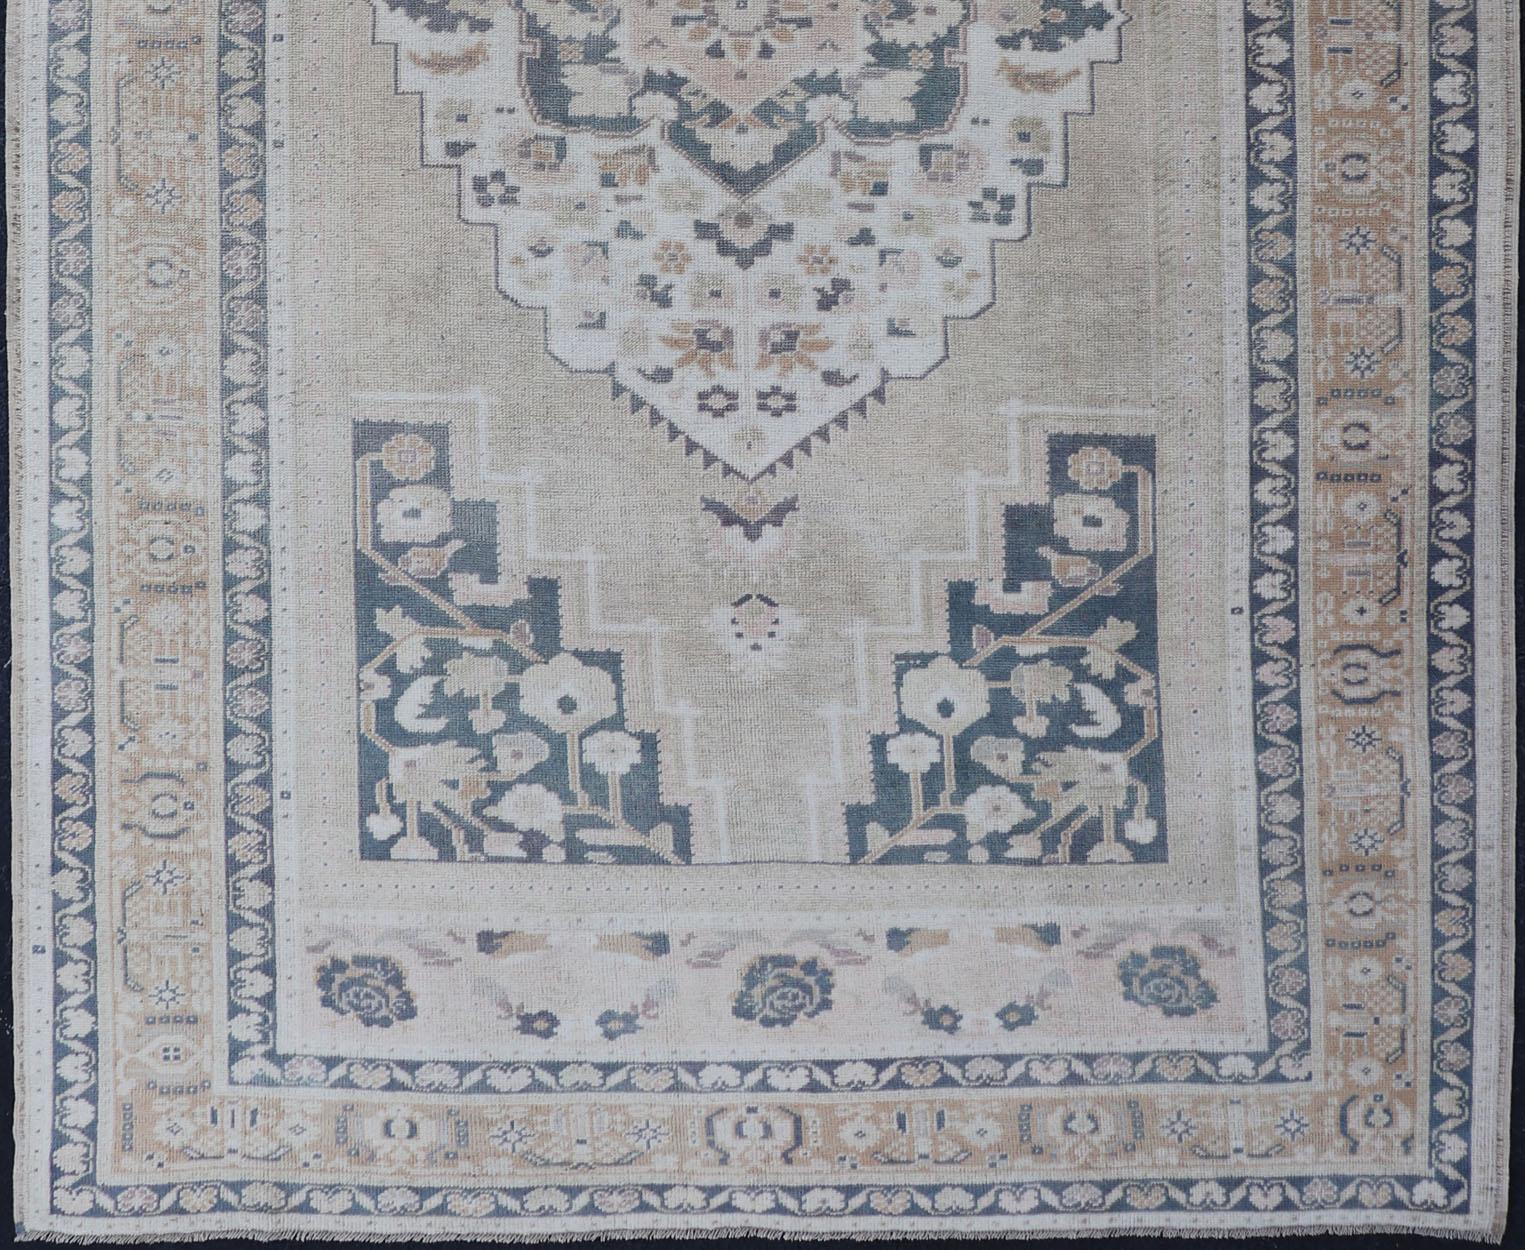 Vintage Turkish Oushak Rug in Dark Gray Blue, Taupe, Khaki & Lt. Brown In Excellent Condition For Sale In Atlanta, GA